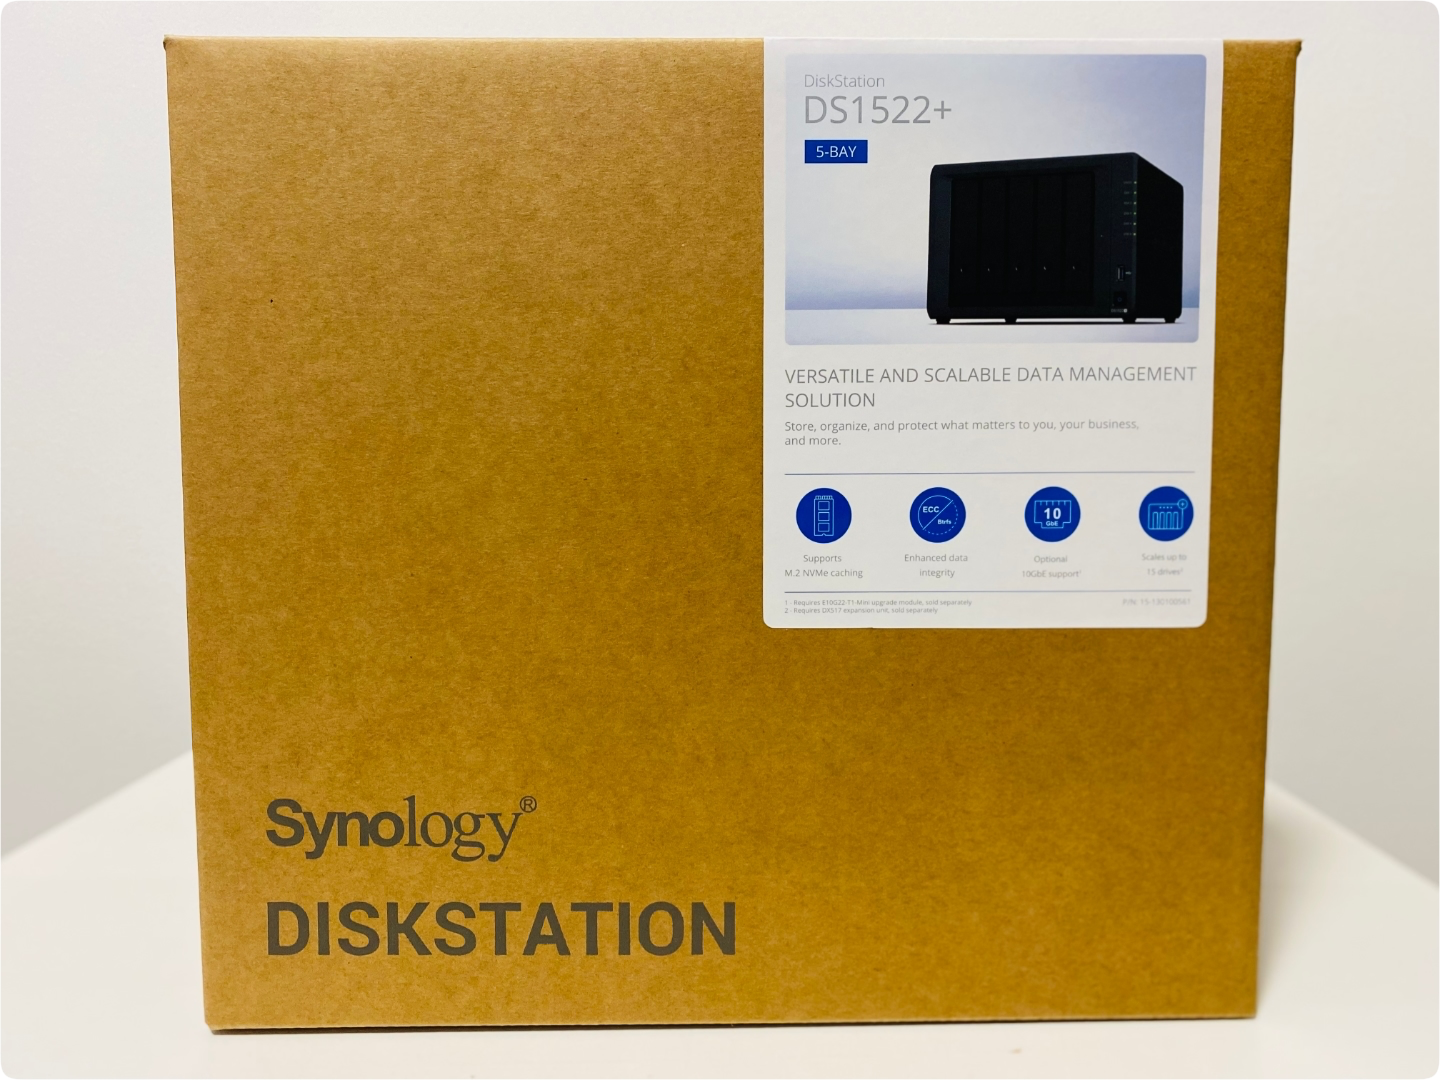 Synology DS1522+ review